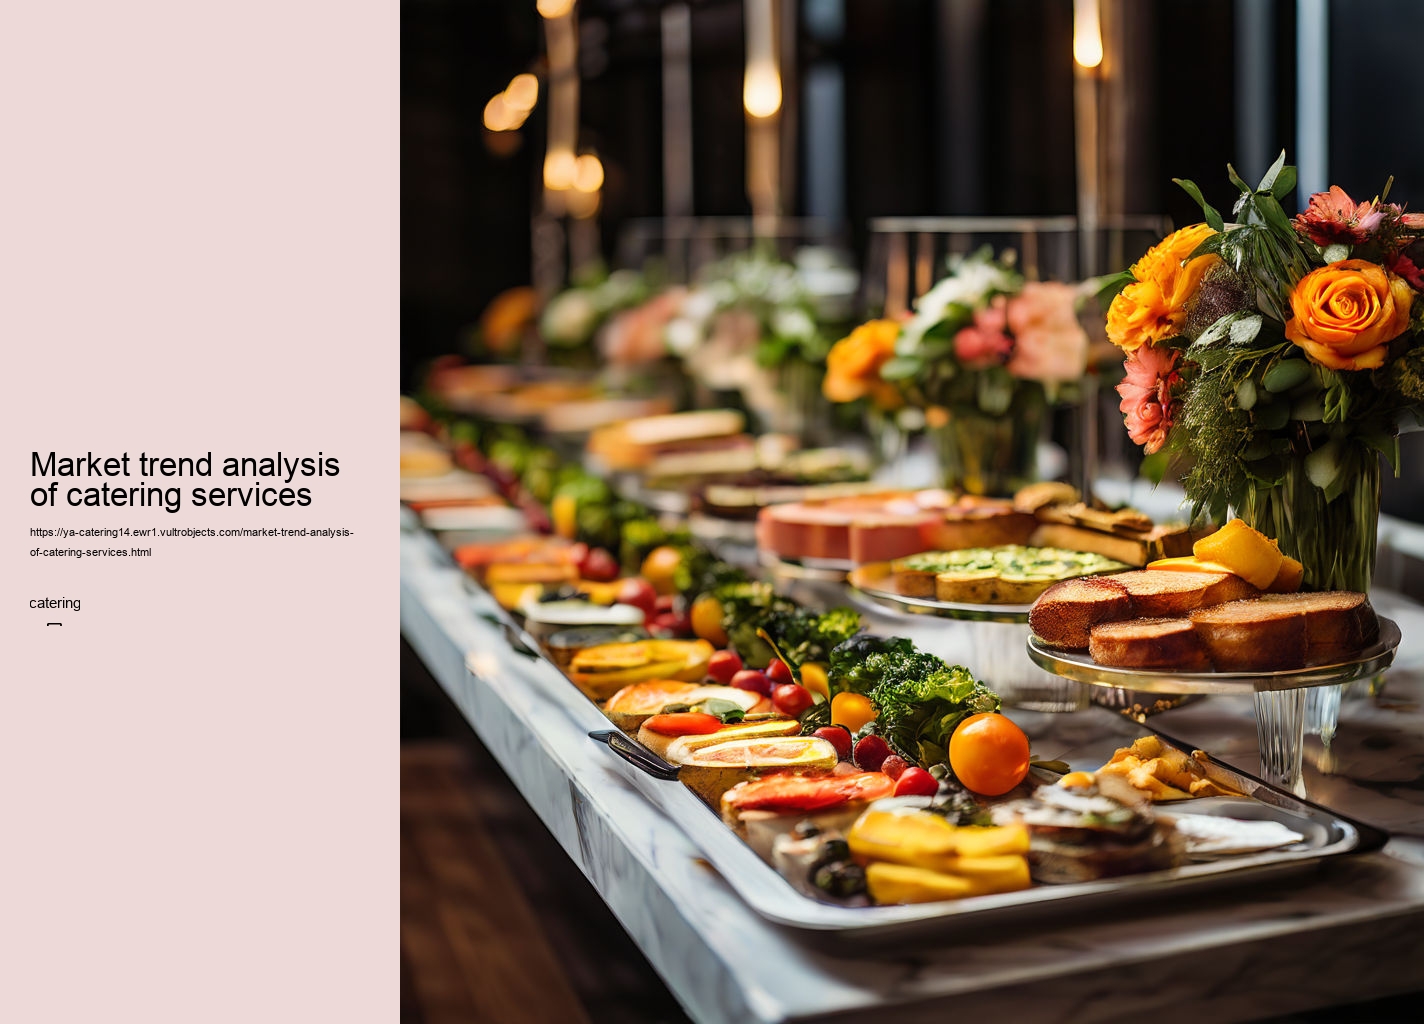 Market trend analysis of catering services